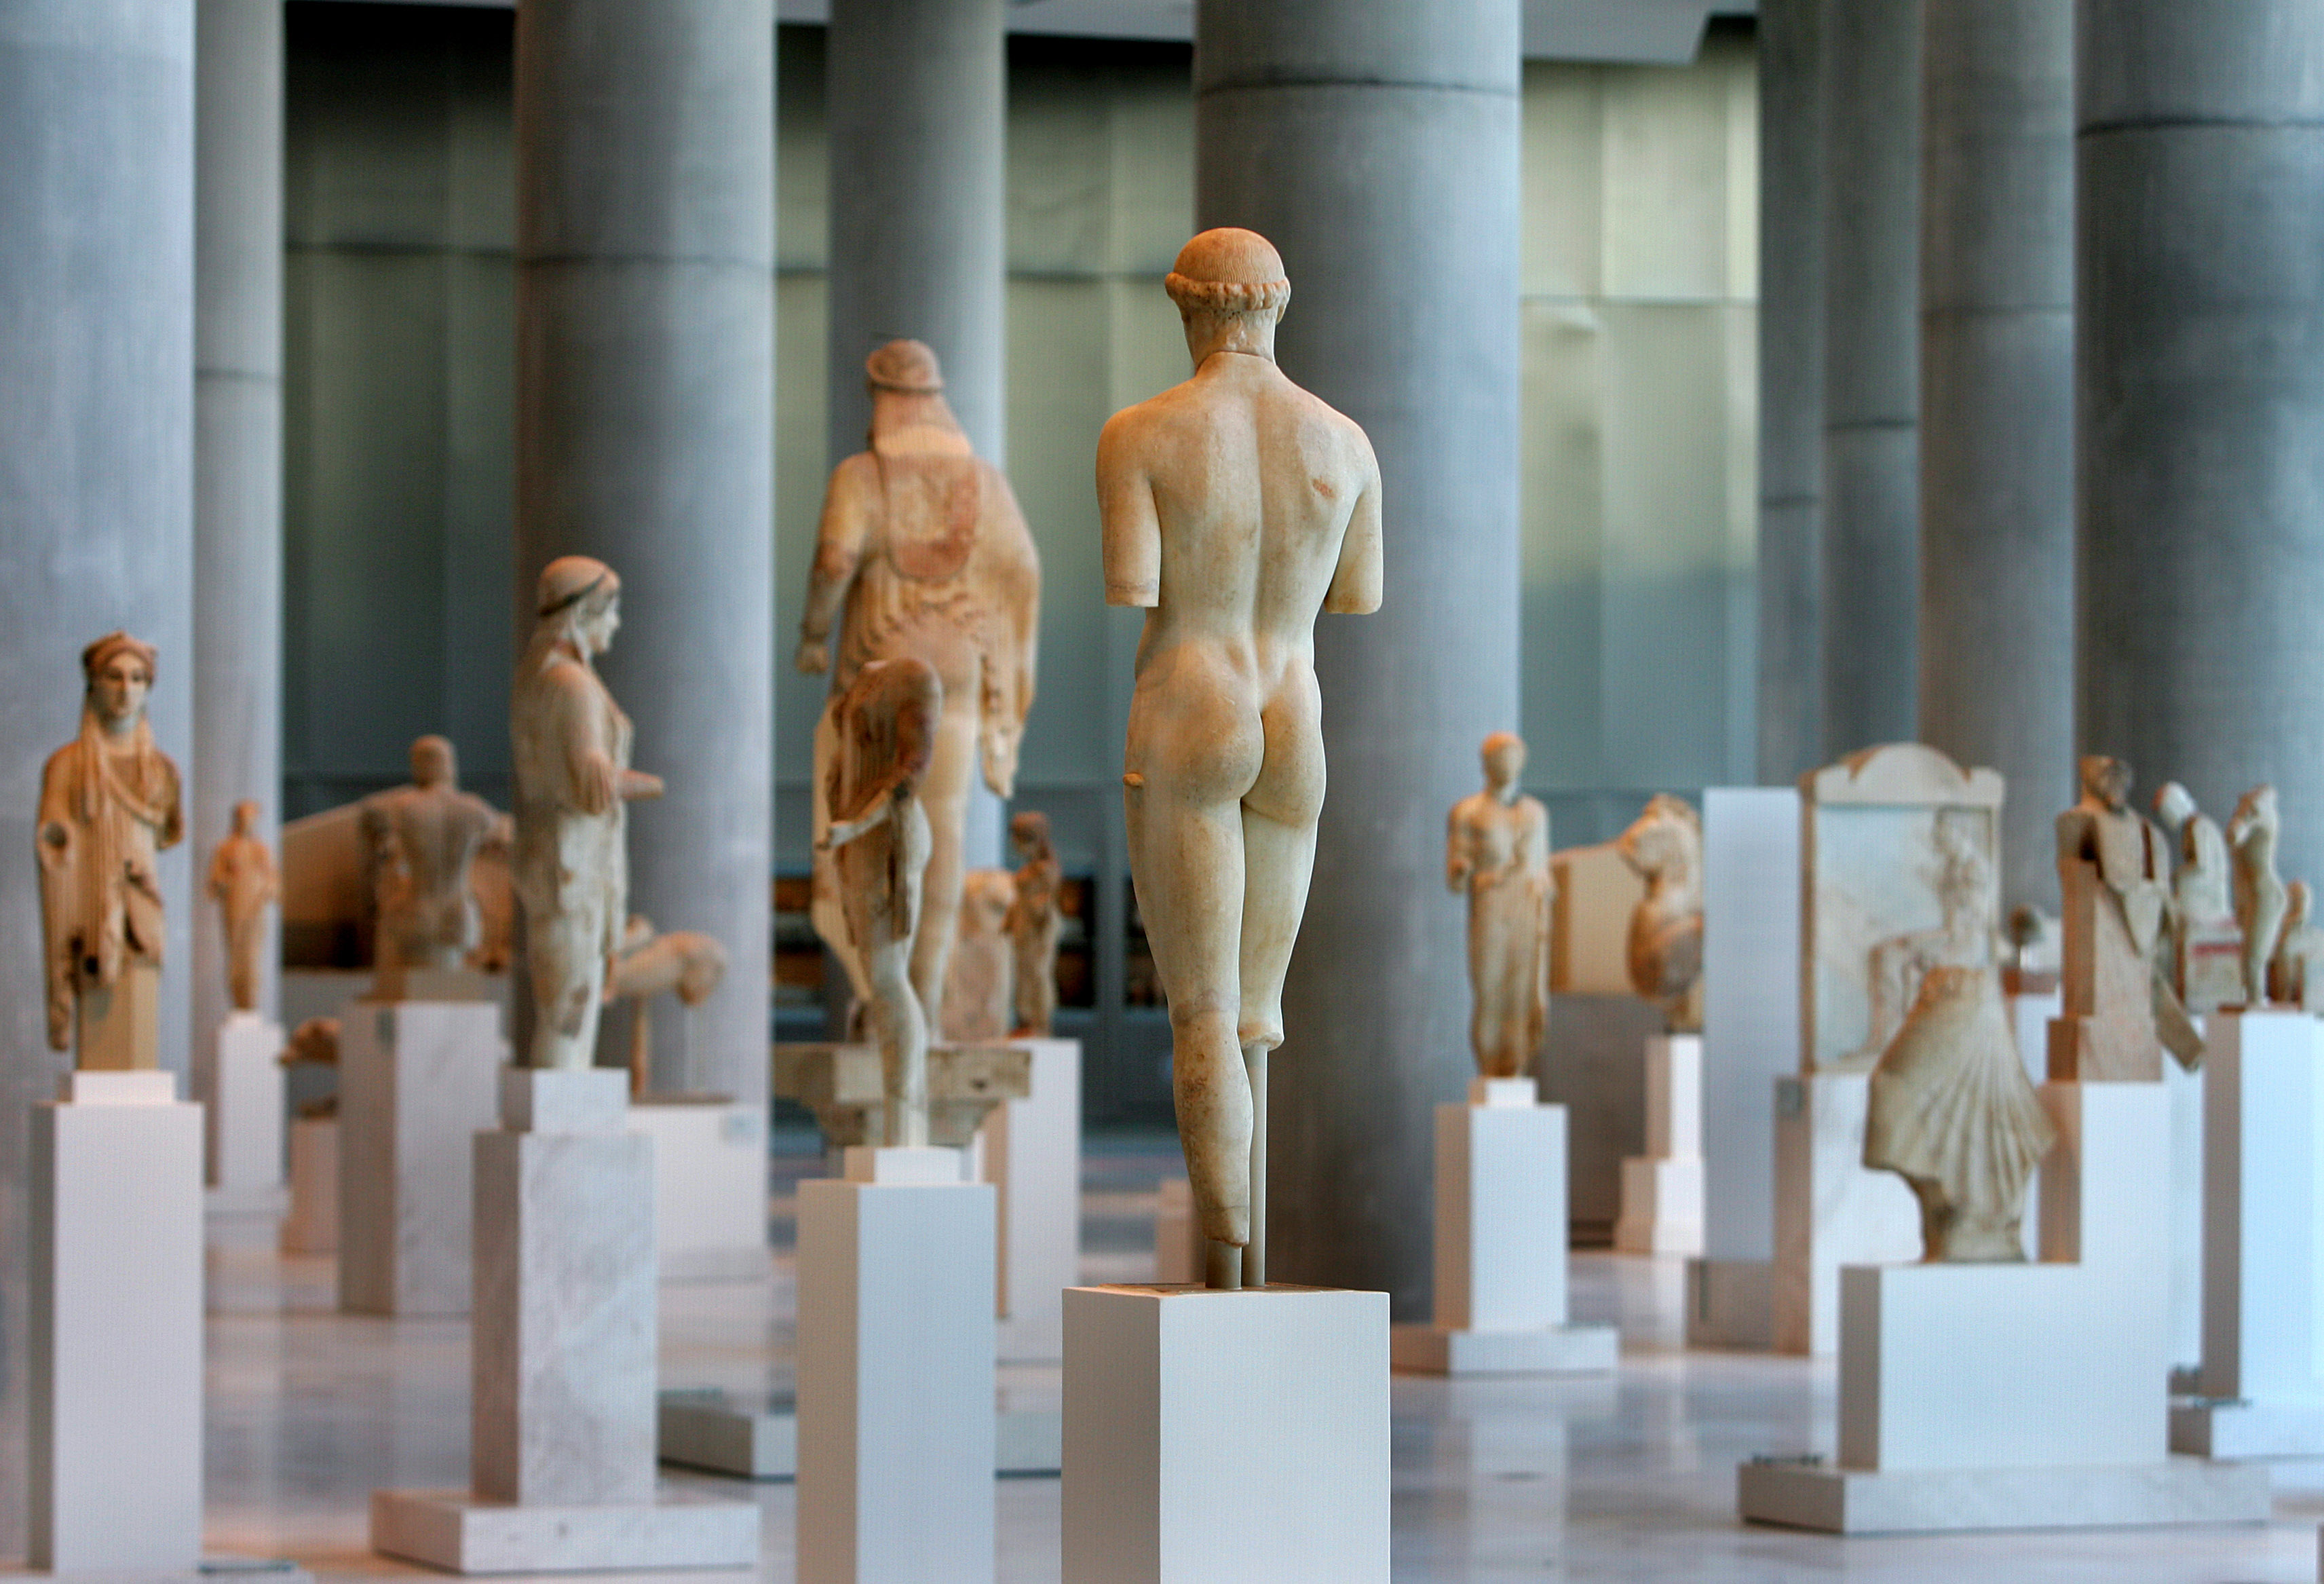 Sculptures are displayed at the Archaic Hall in the New Acropolis Museum in Athens